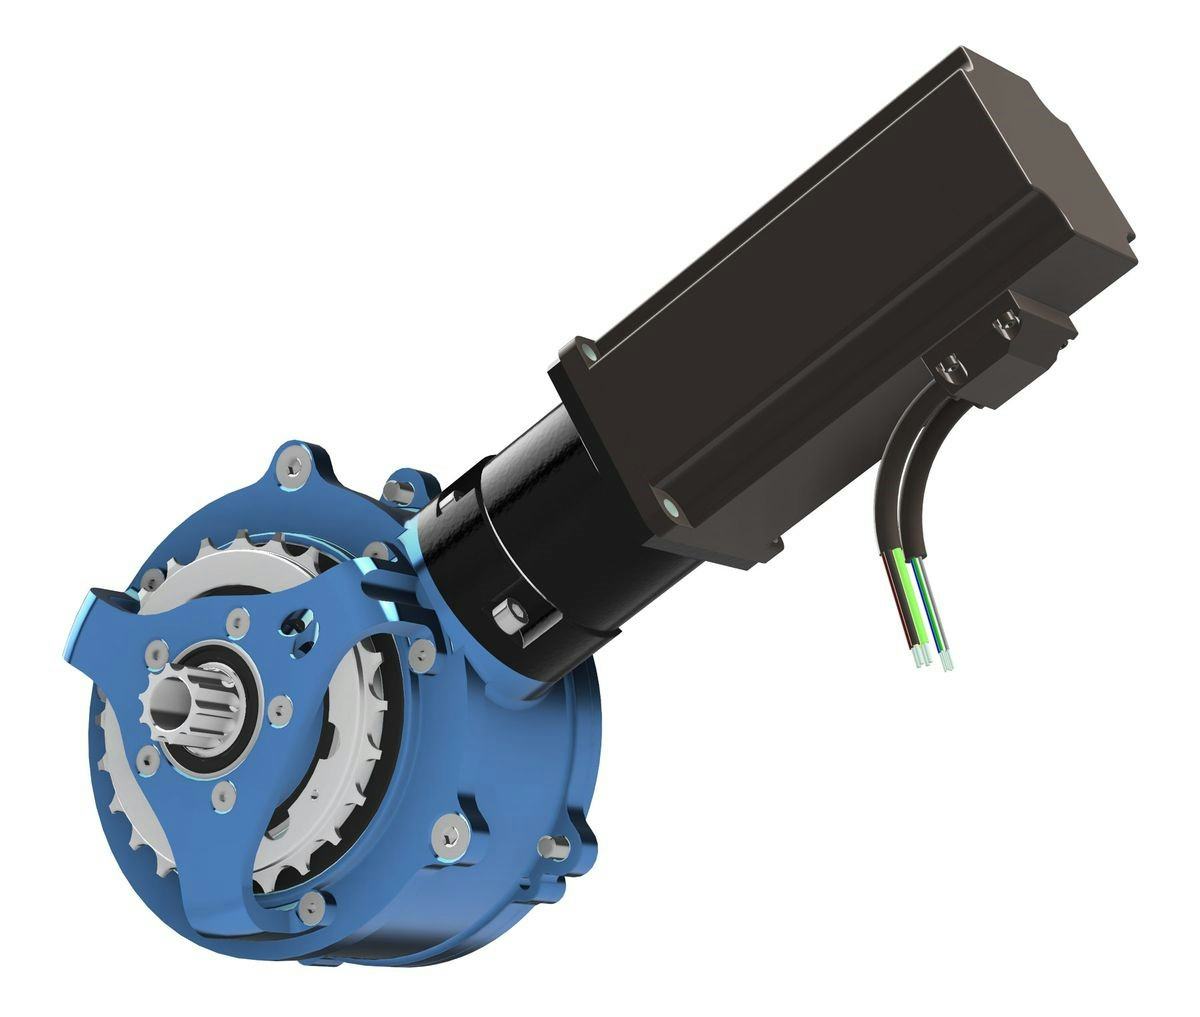 Kervelo integrates 4, 6 or 12 speed gearbox with 250W drive unit. – Photo Kervelo